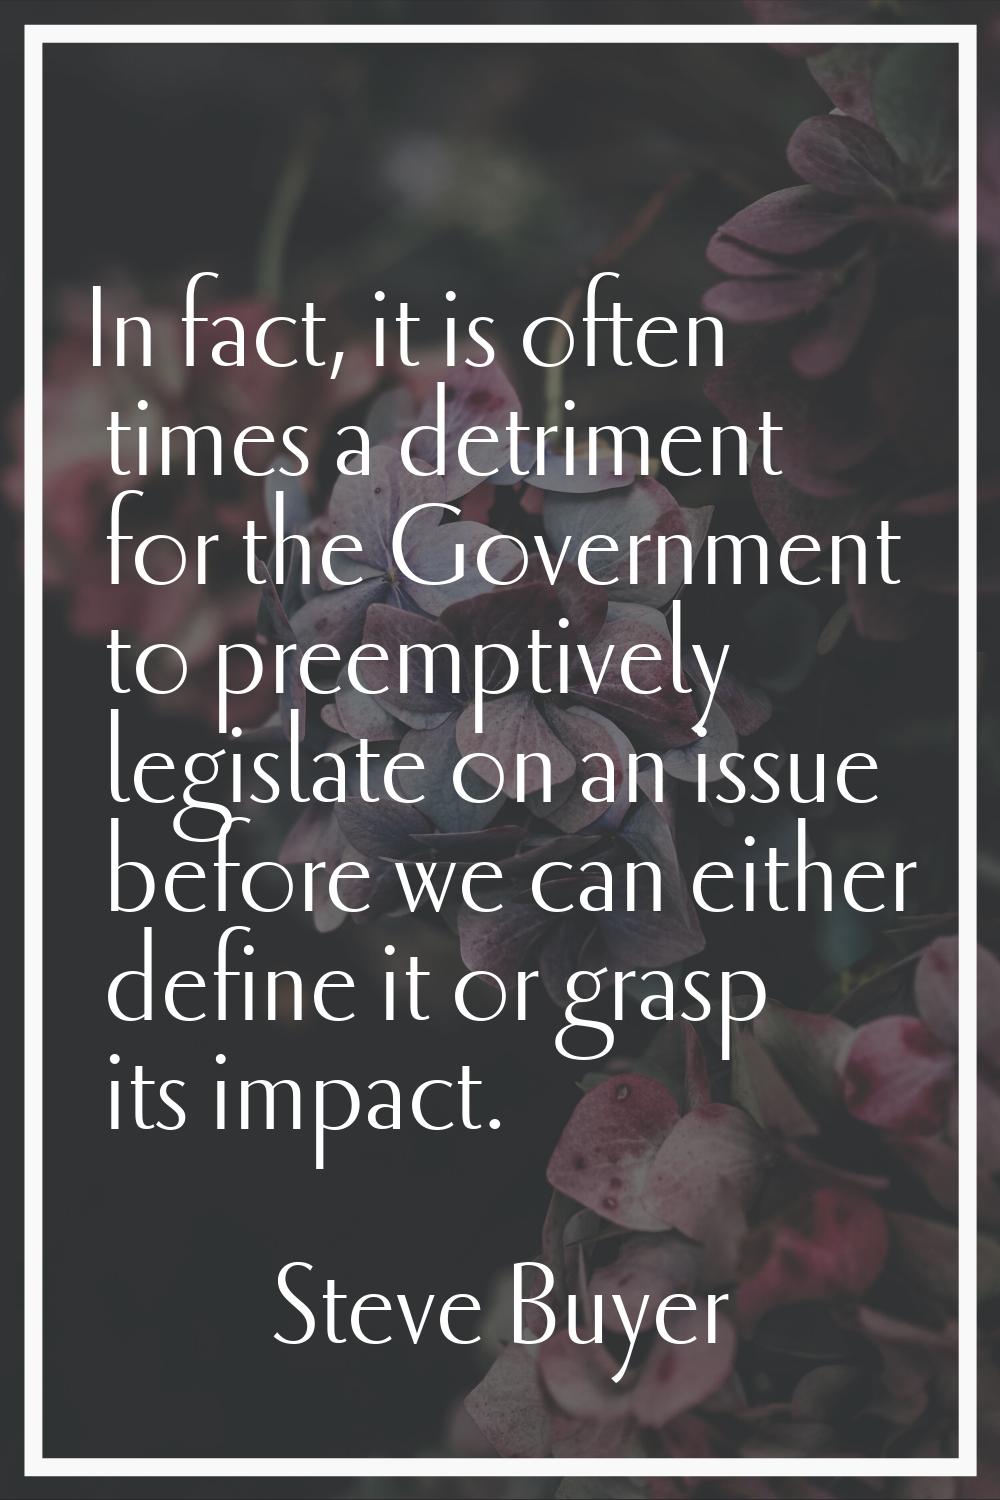 In fact, it is often times a detriment for the Government to preemptively legislate on an issue bef